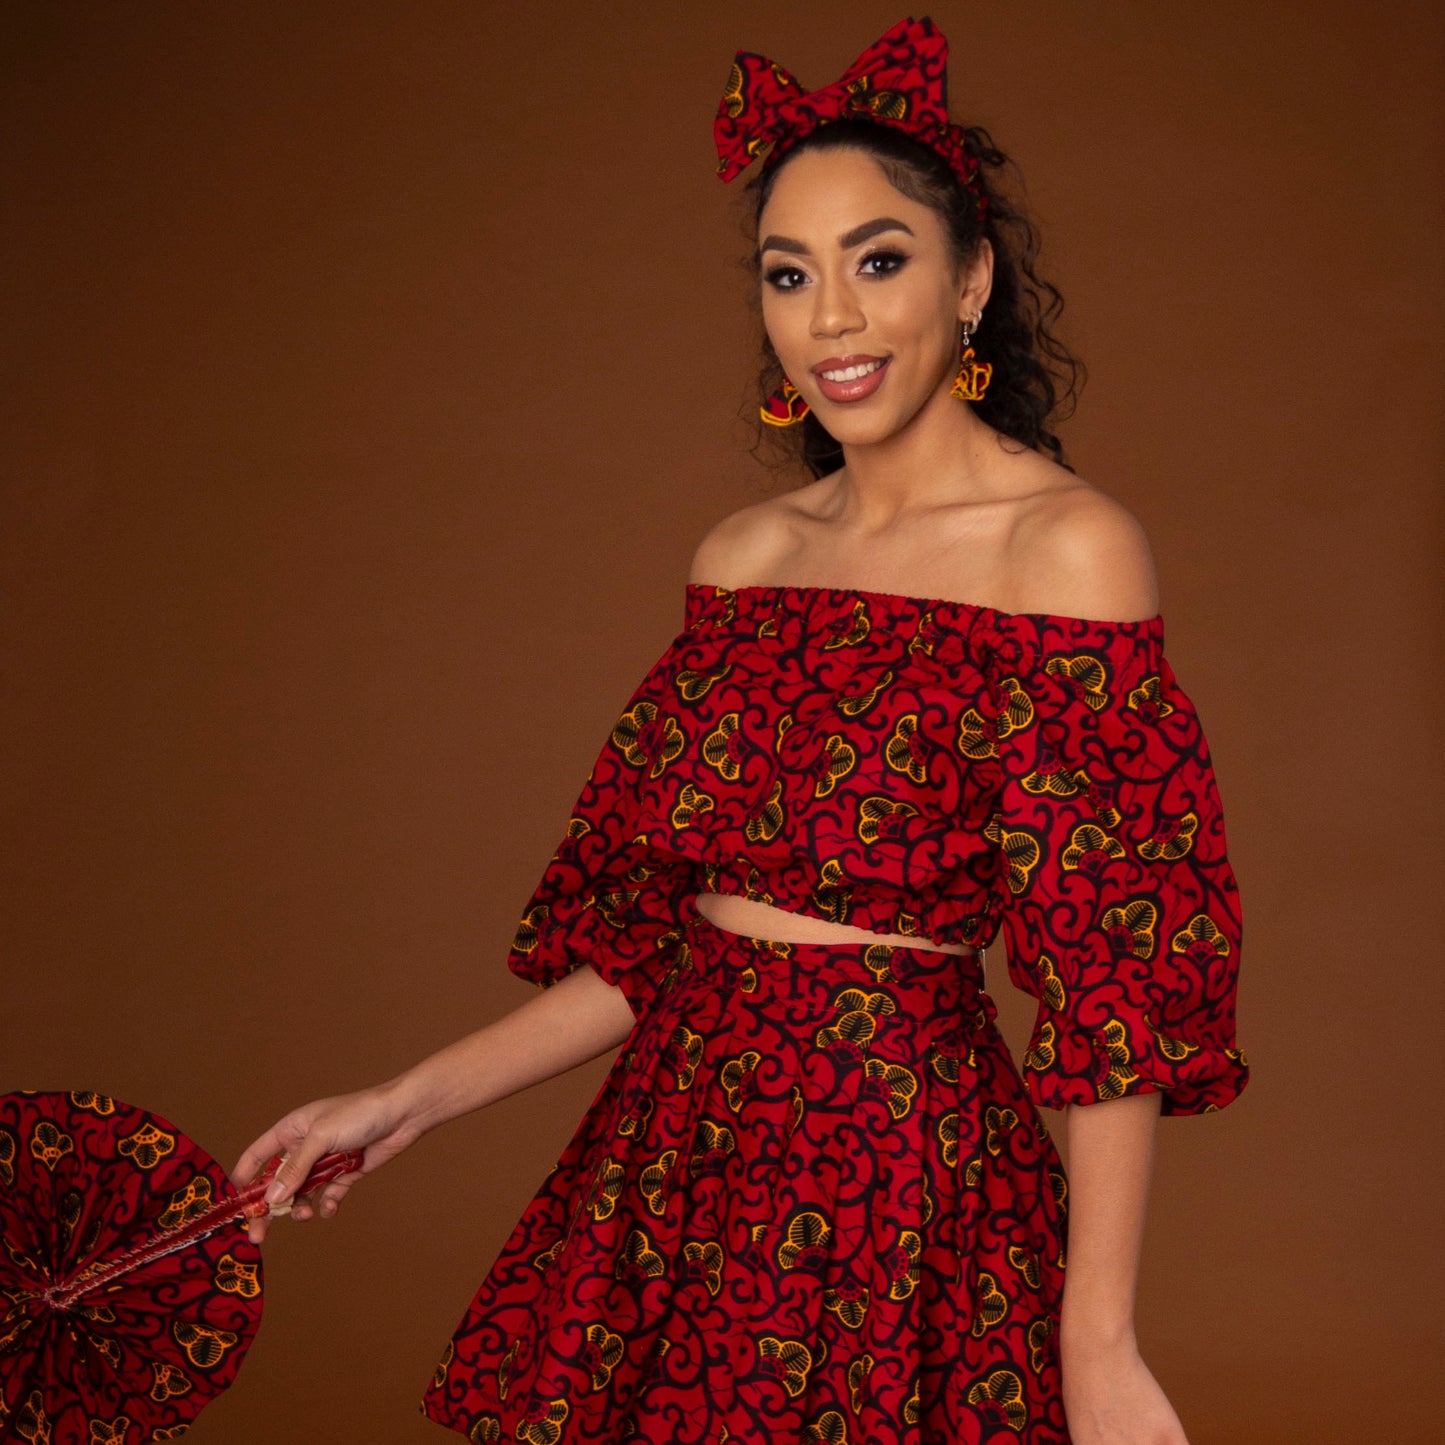 African print balloon sleeve crop top and matching high waisted flare skirt a striking red, yellow and black ankara fabric